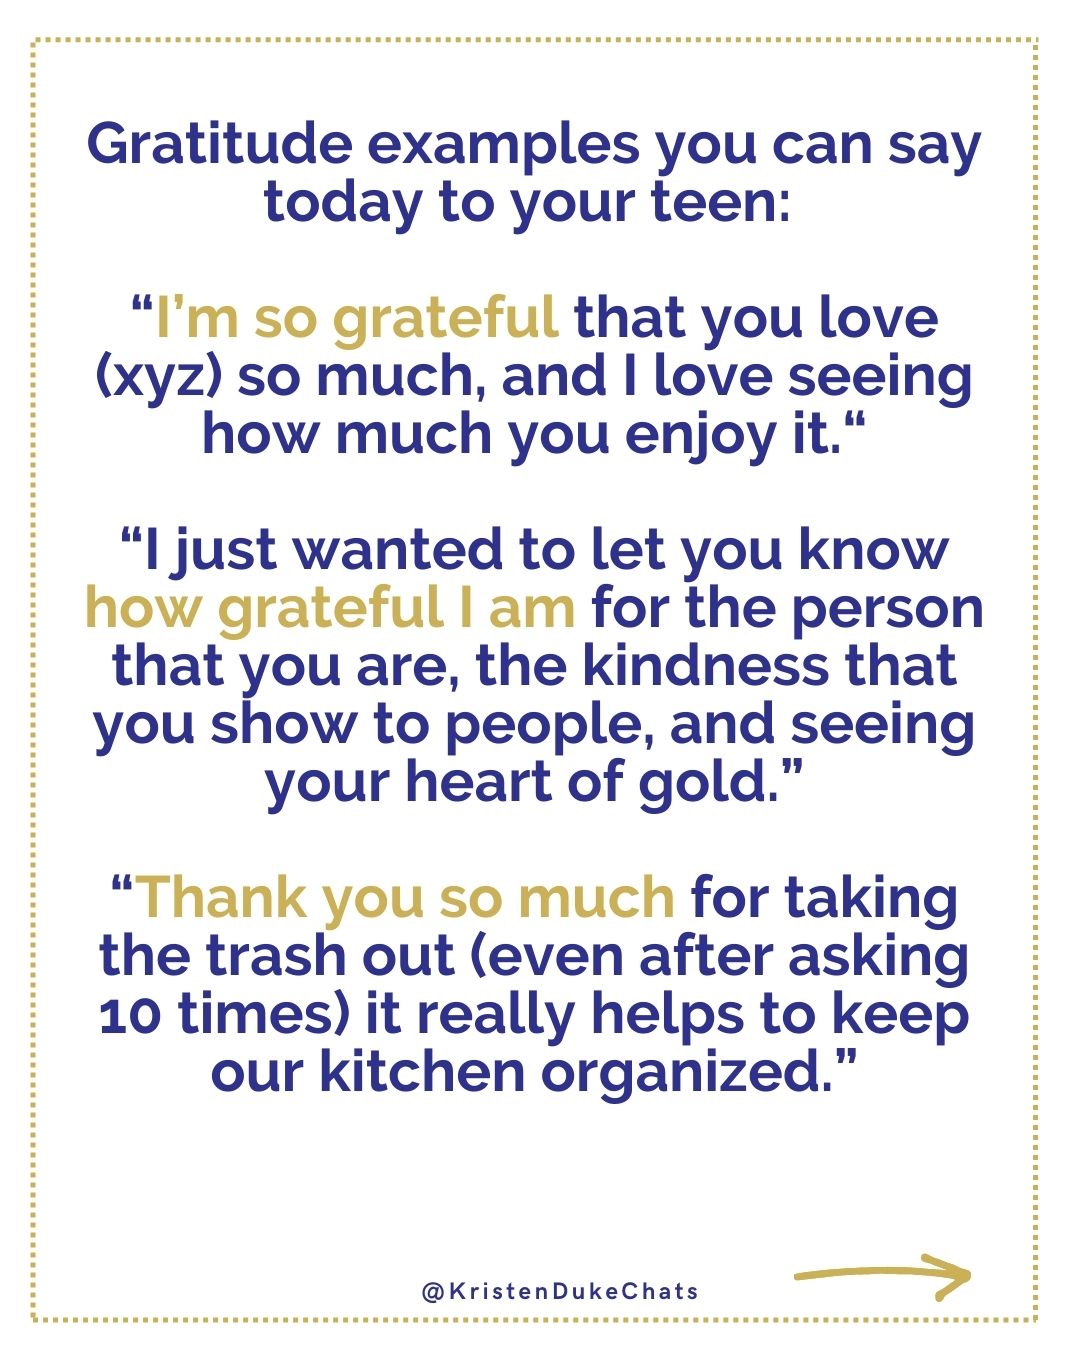 How to help your teenager be more GRATEFUL